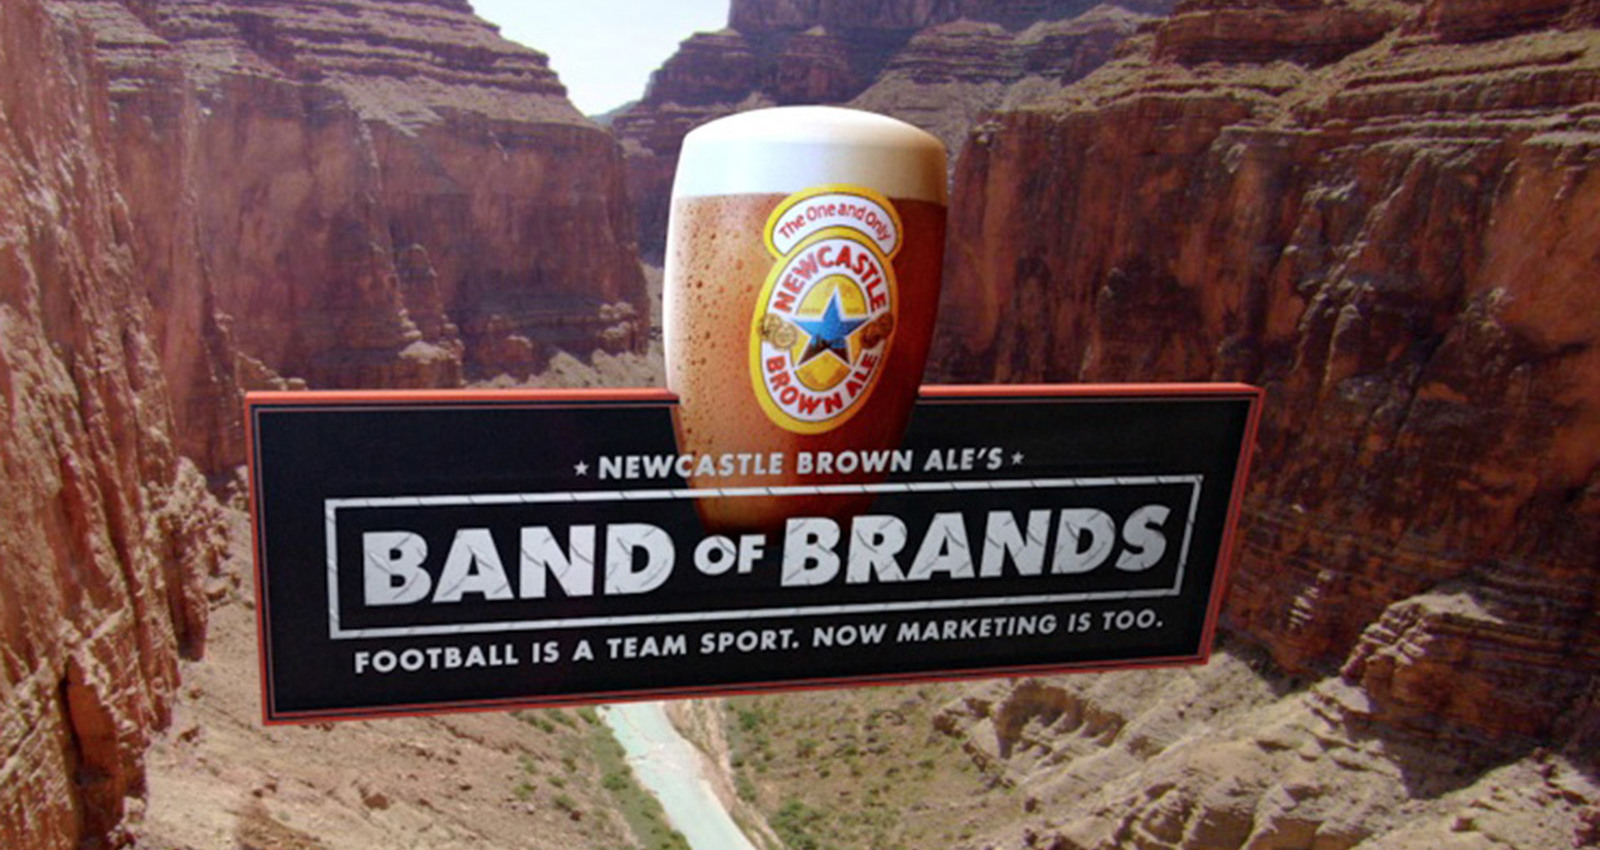 Newcastle Brown Ale: Band of Brands